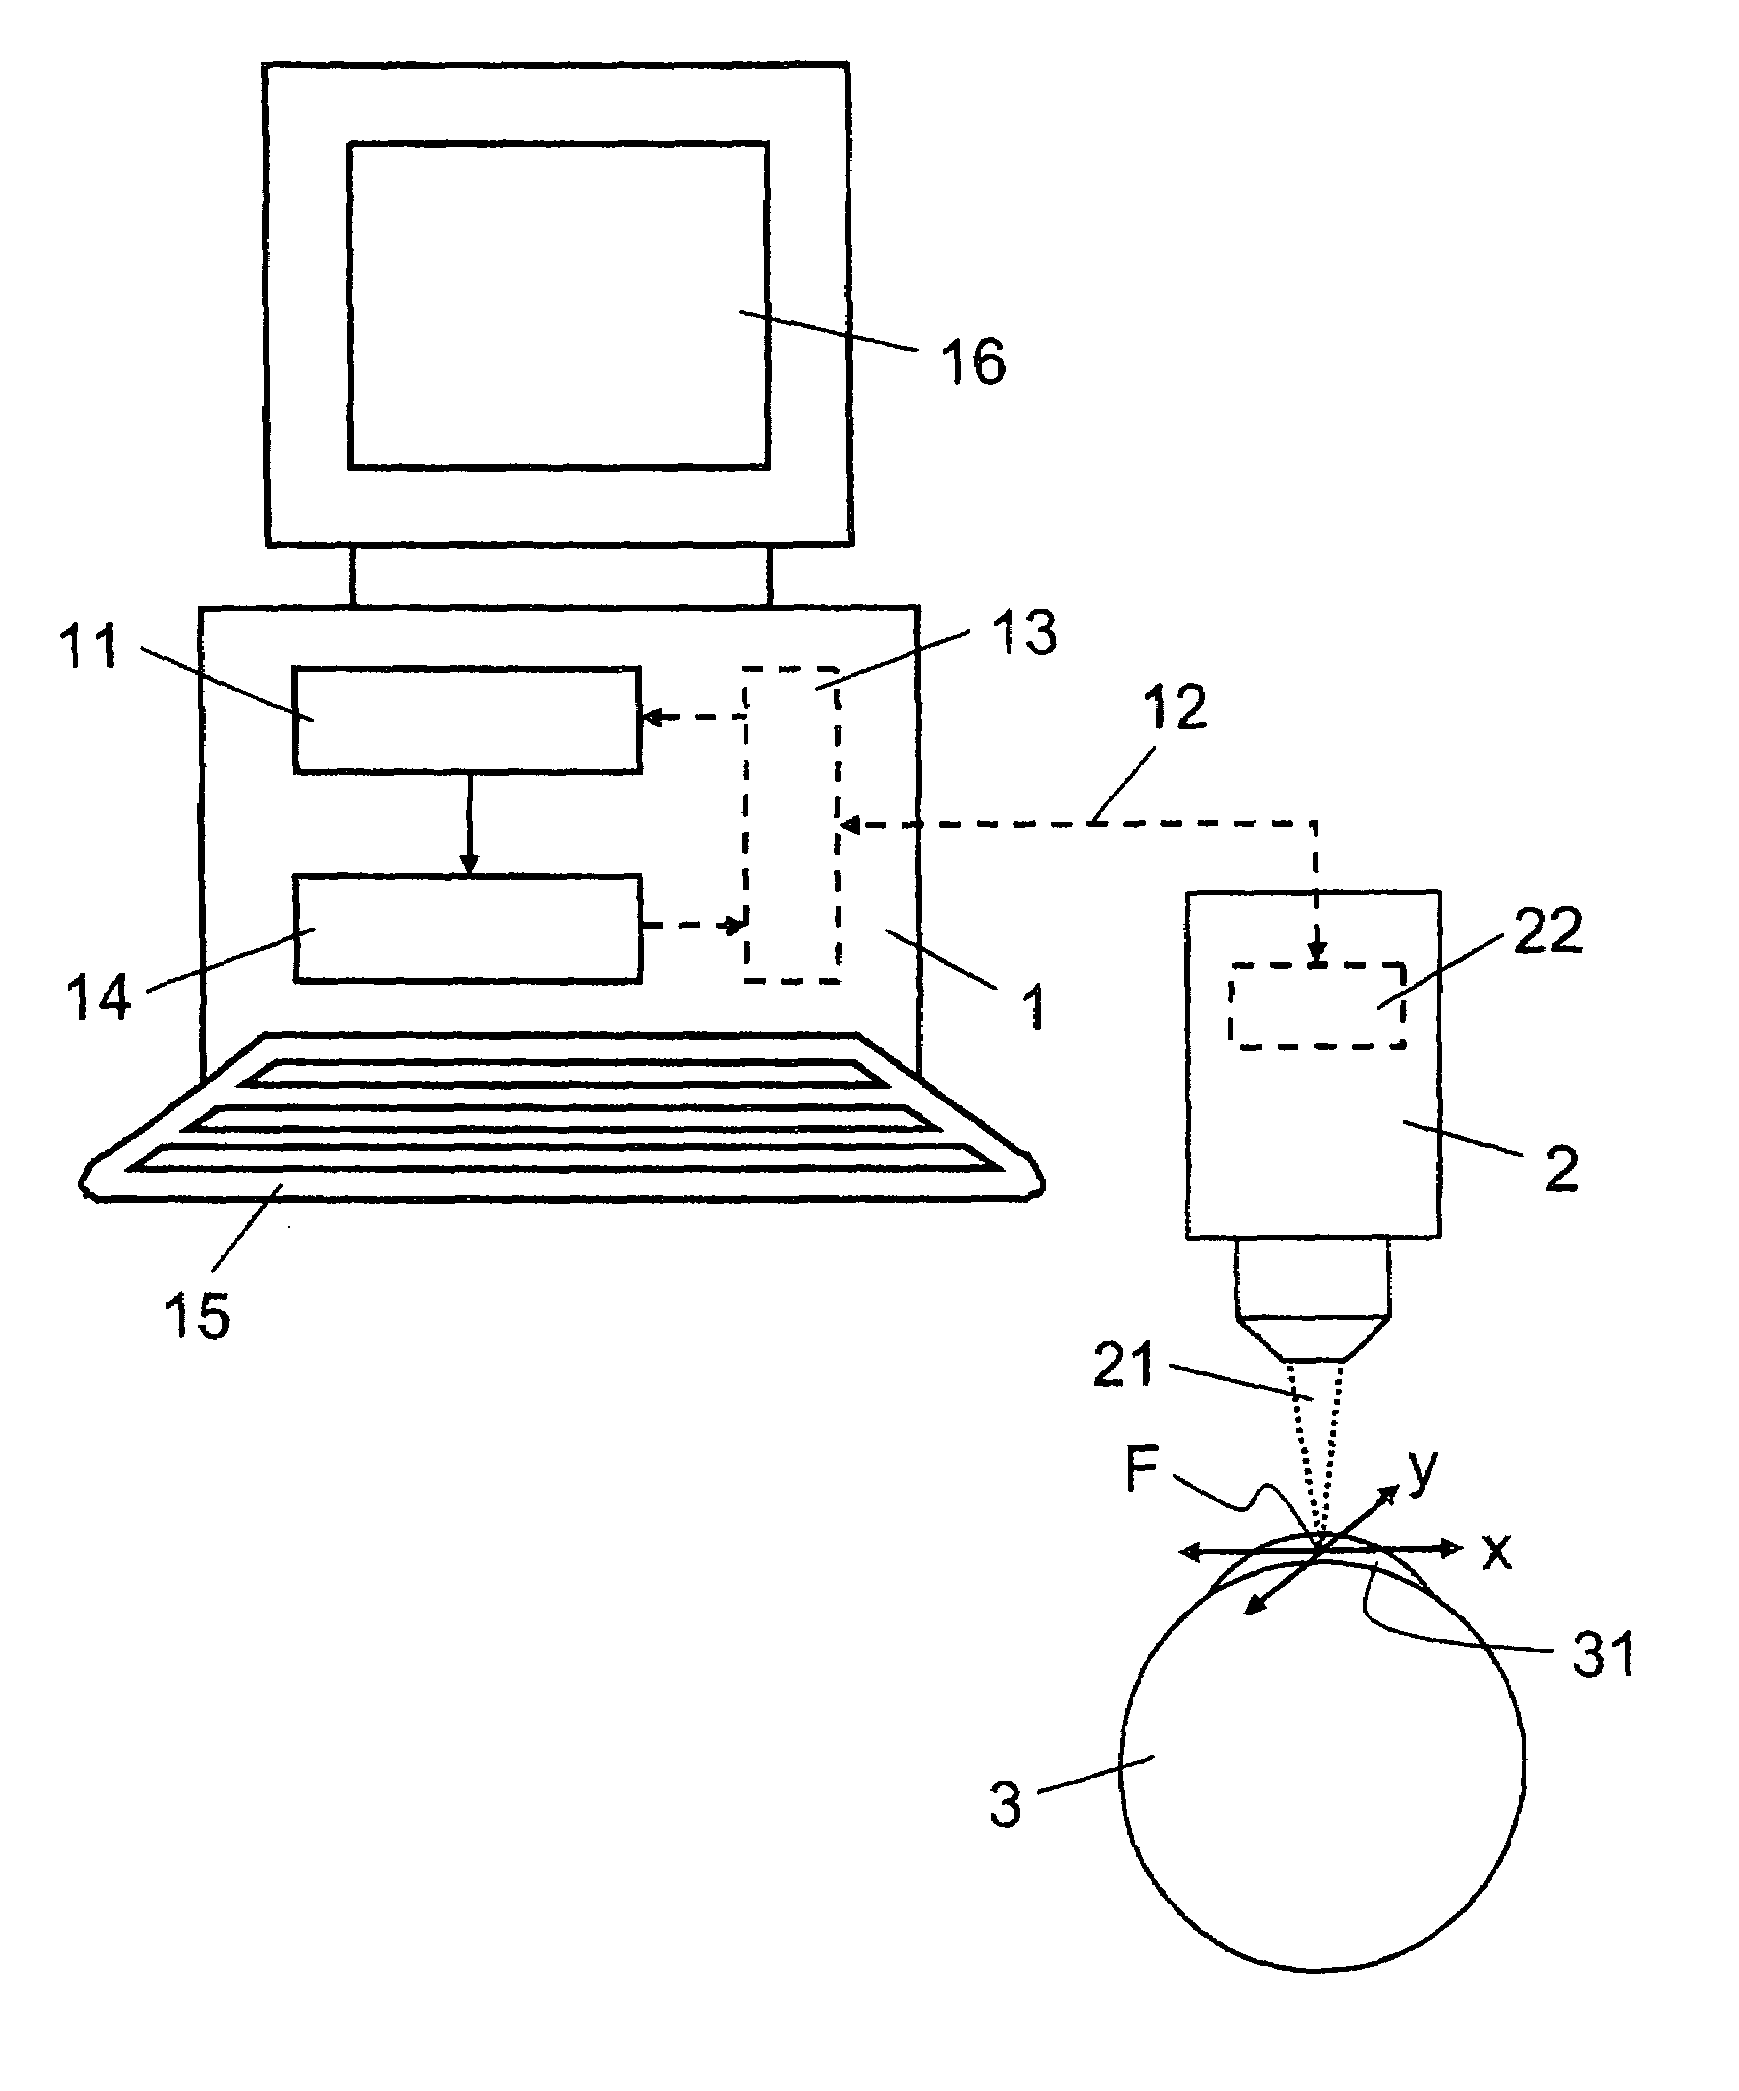 Device and method for protecting tissue in the treatment of eyes